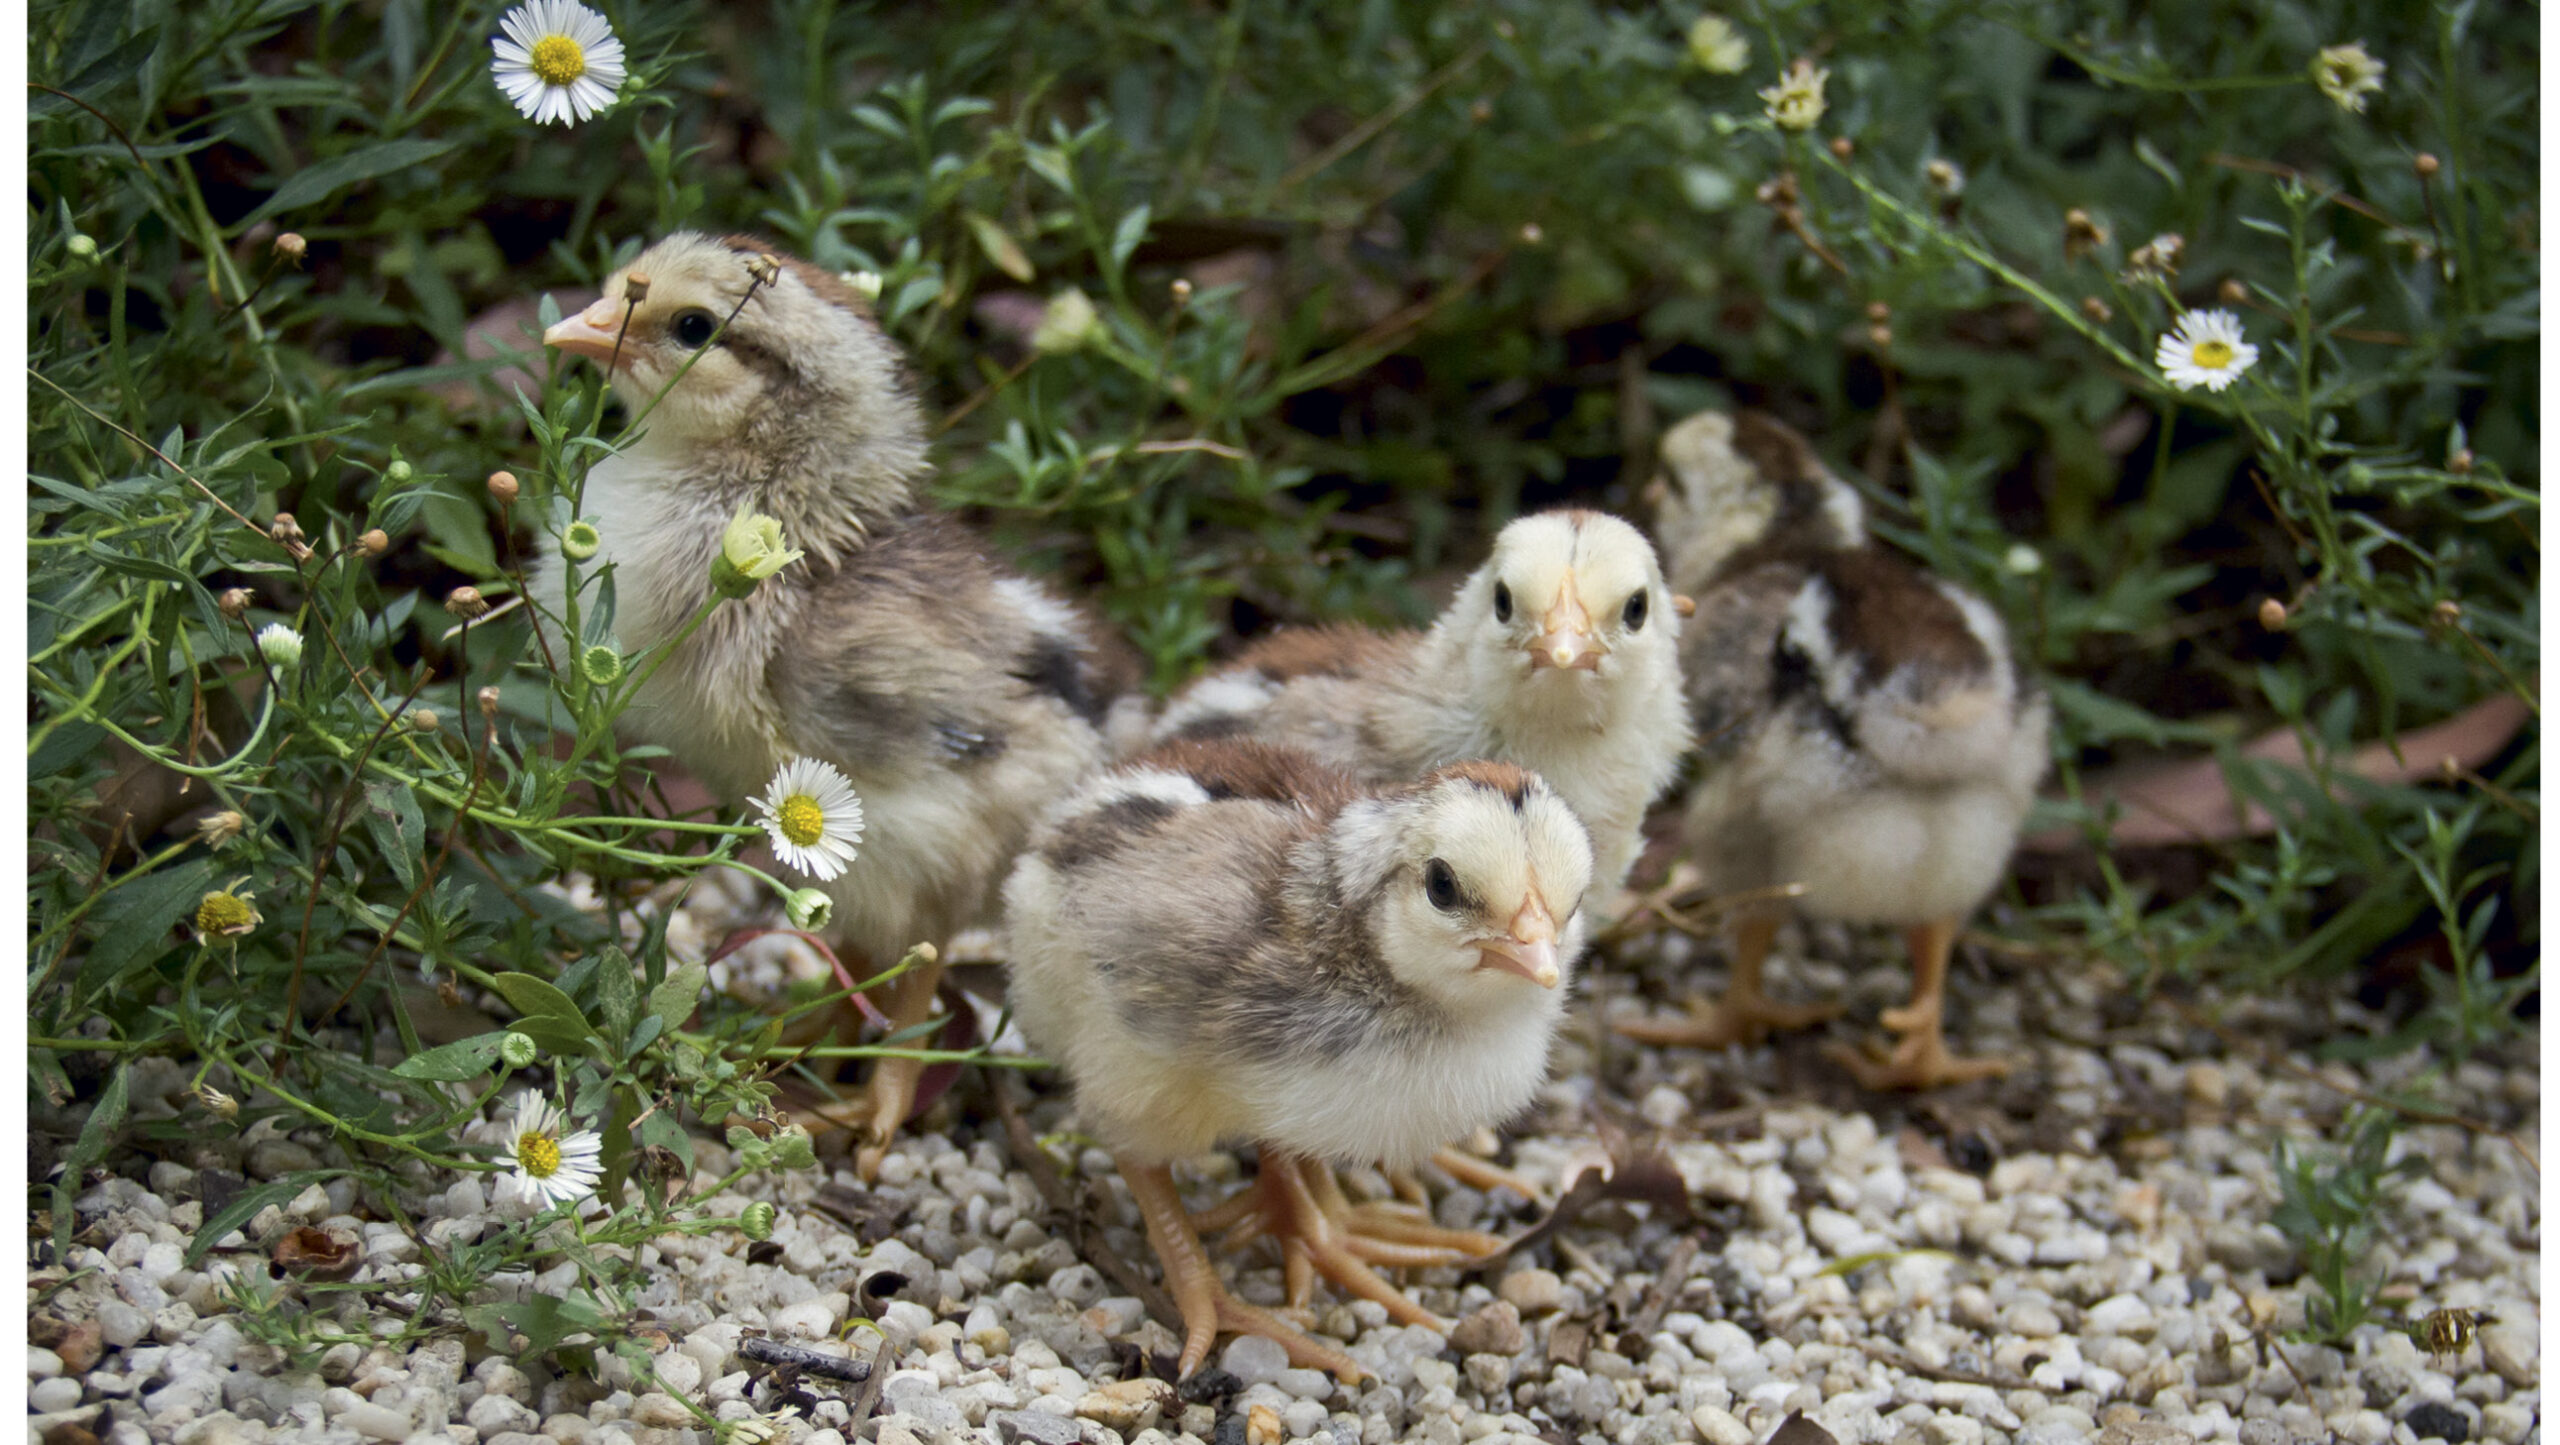 Clear your yard of any possible hazards for chicks.